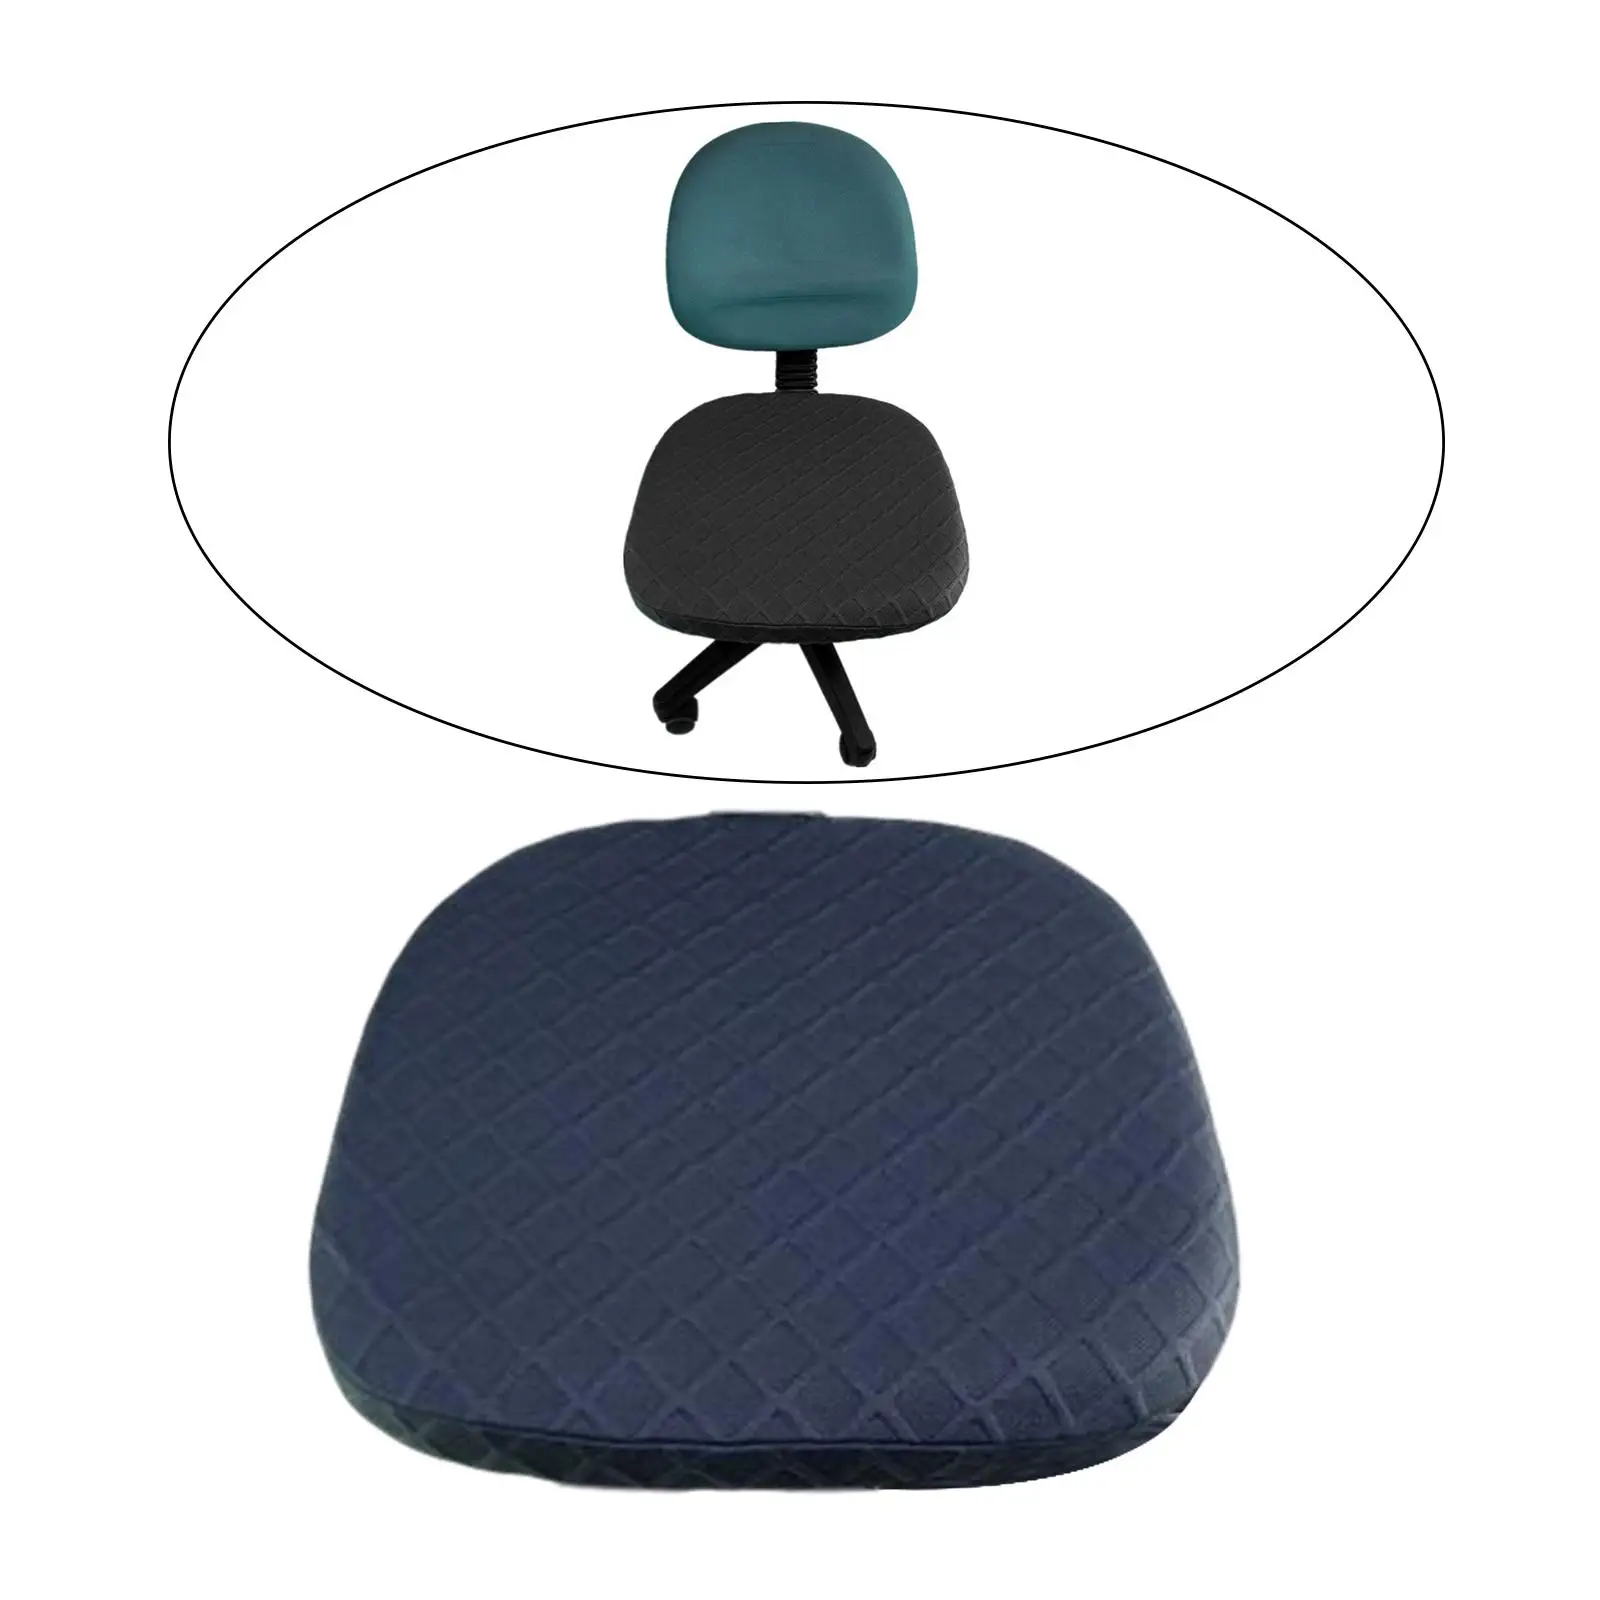 Stretchable Jacquard Computer Chair Seat Cover Anti Slip Flexible Easily Install for Square or Round Seat Cushions Solid Pattern